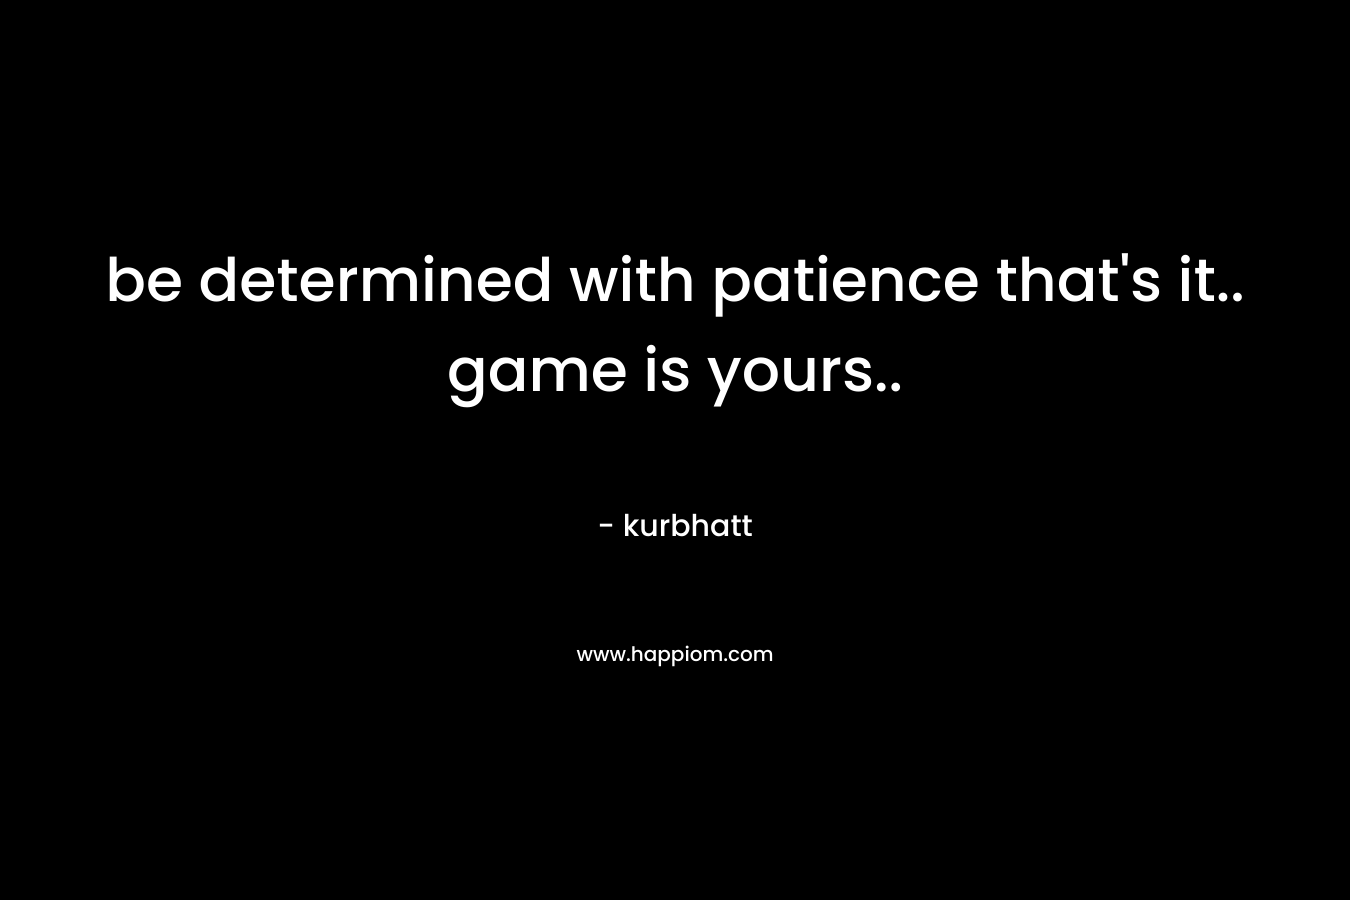 be determined with patience that's it.. game is yours..